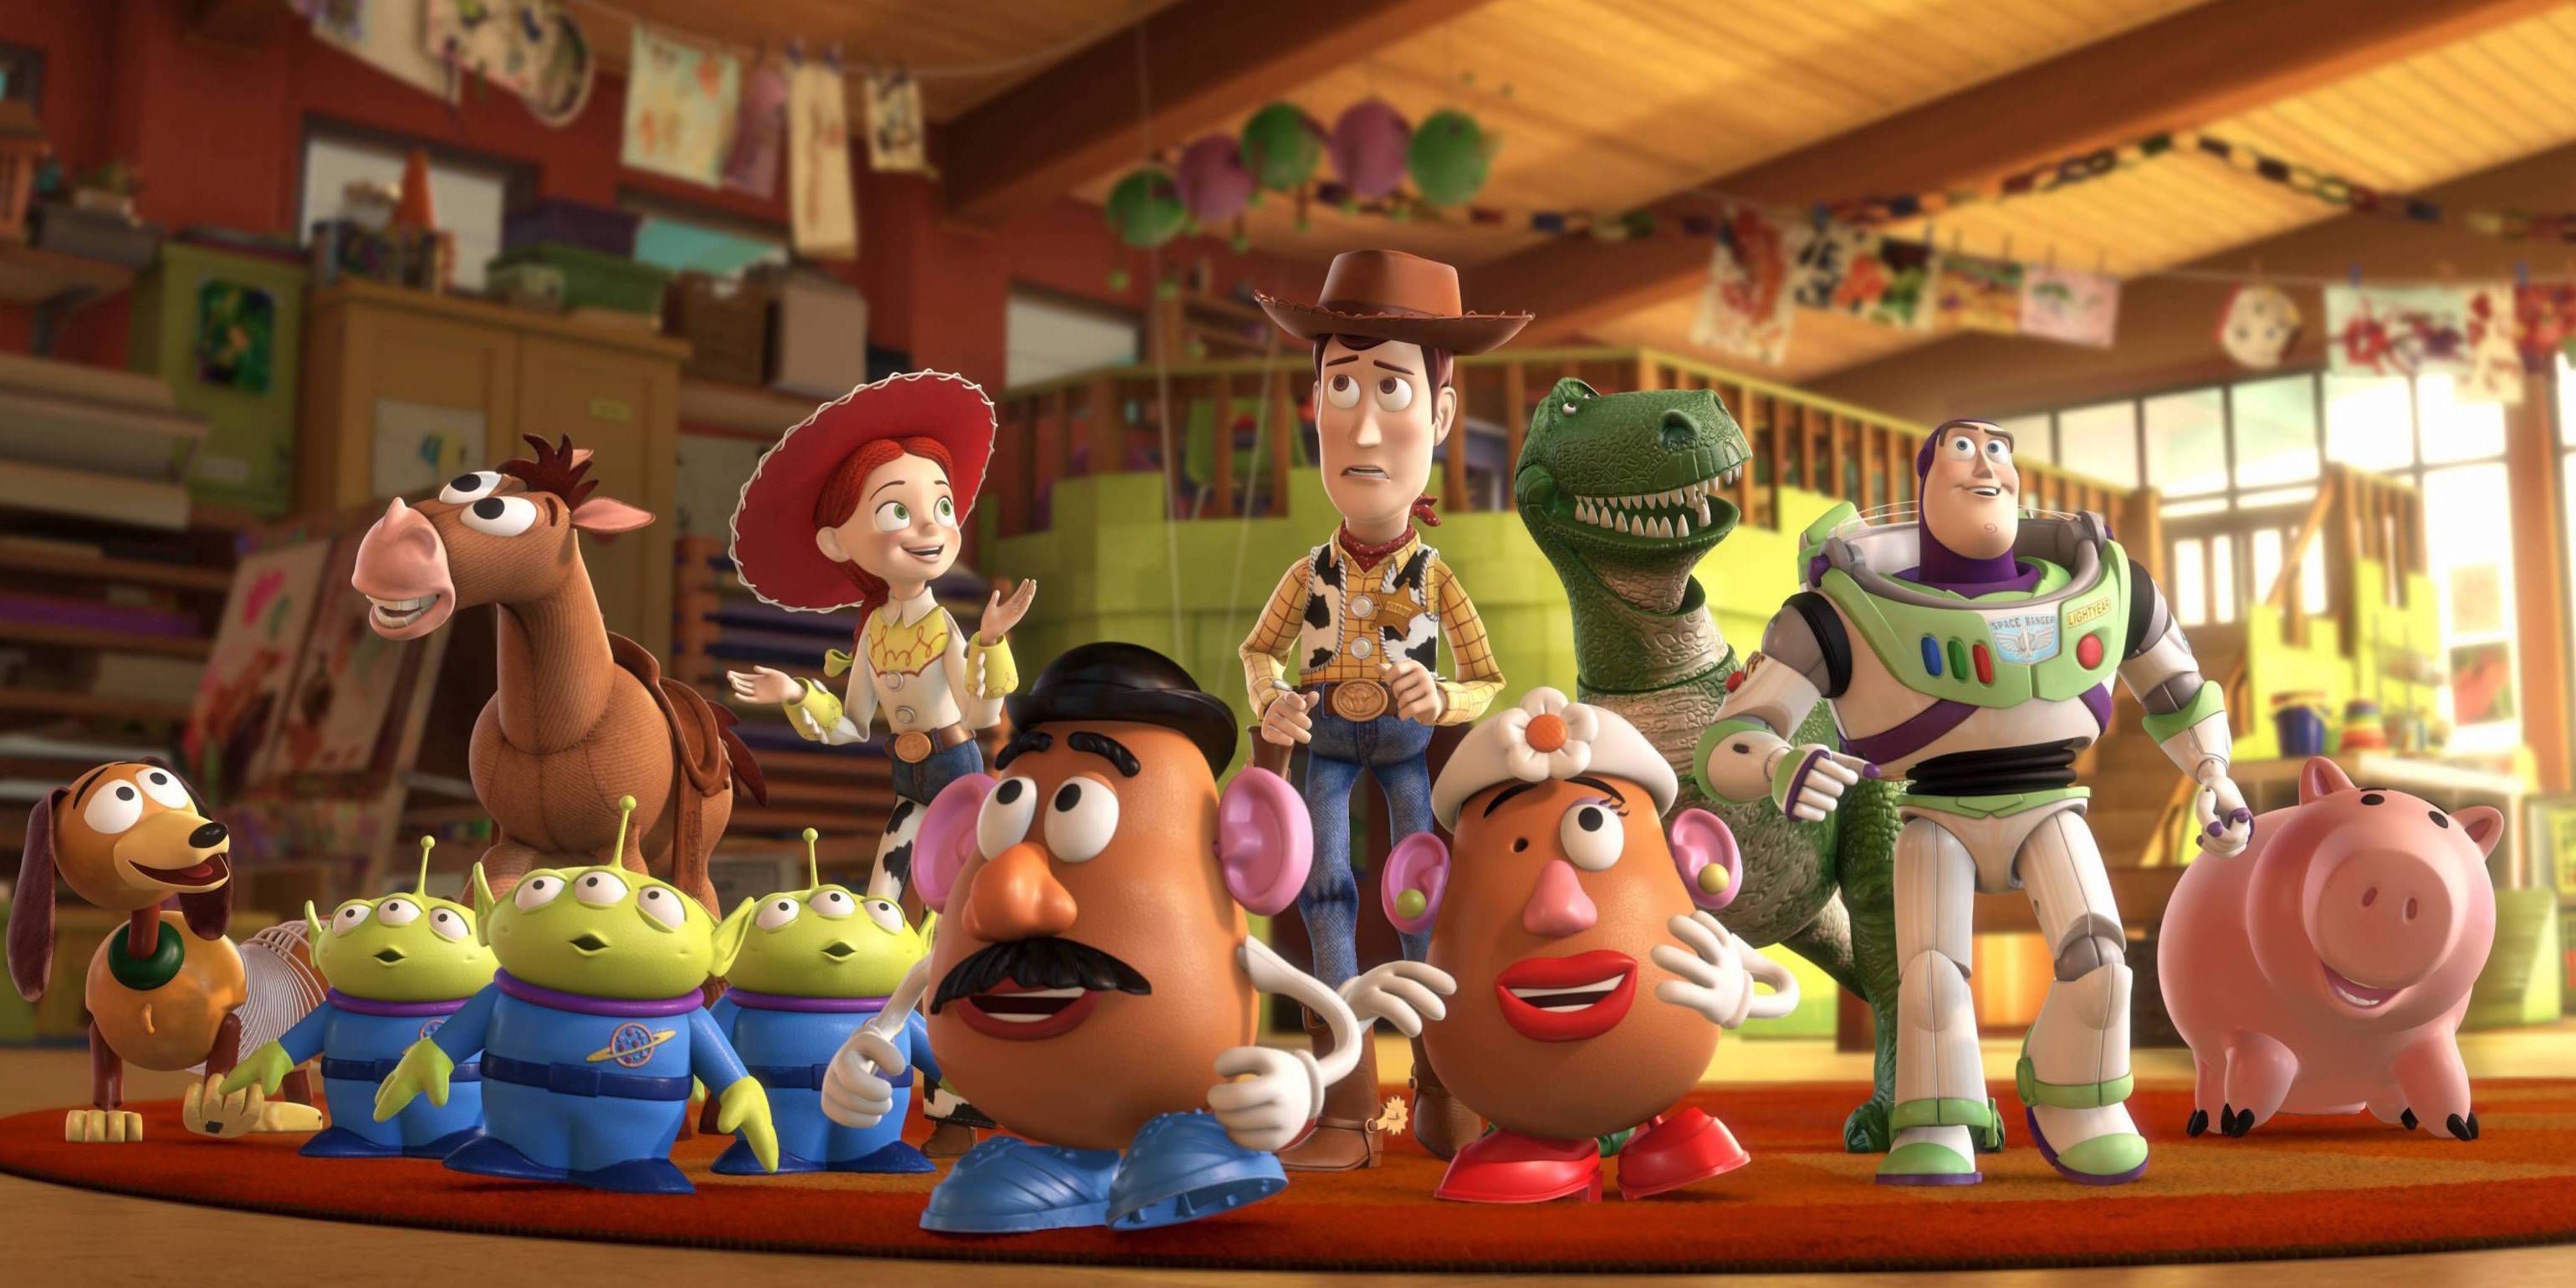 Woody and team venture into Sunnyside Daycare in Toy Story 3